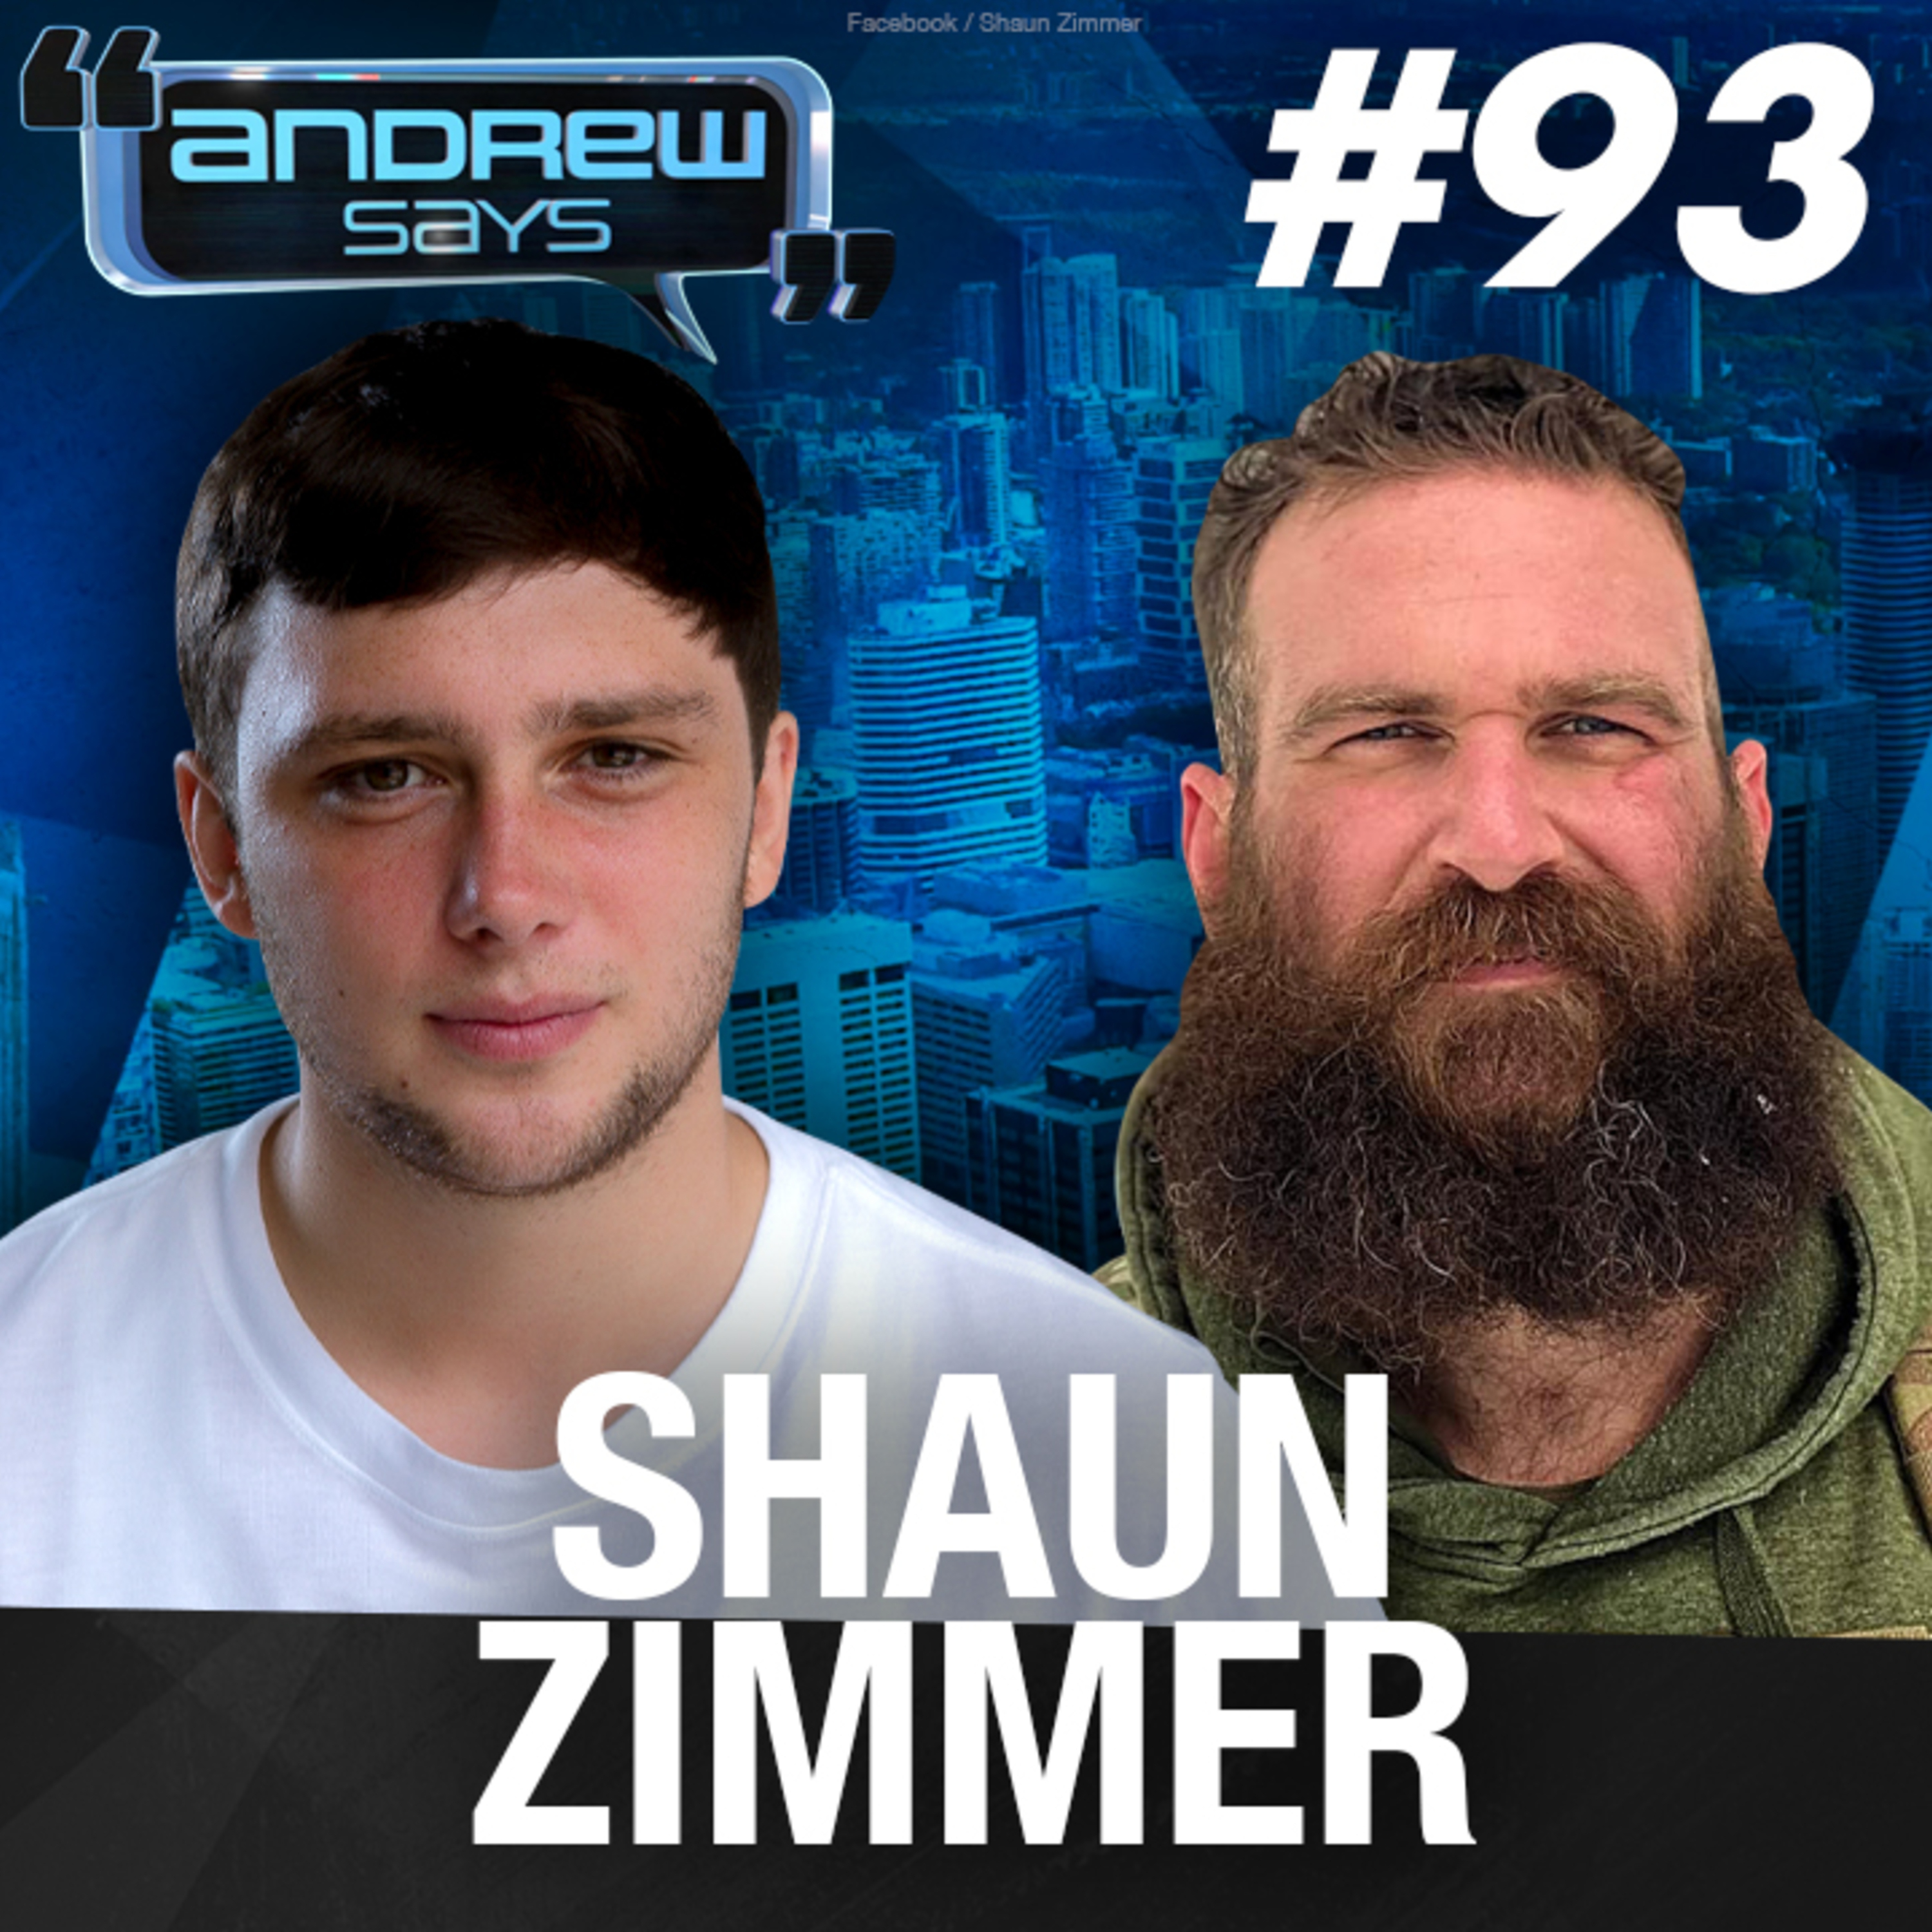 ANDREW CHAPADOS | Business during lockdowns & having your bank frozen | Shaun 'The Viking' Zimmer | Andrew Says 93